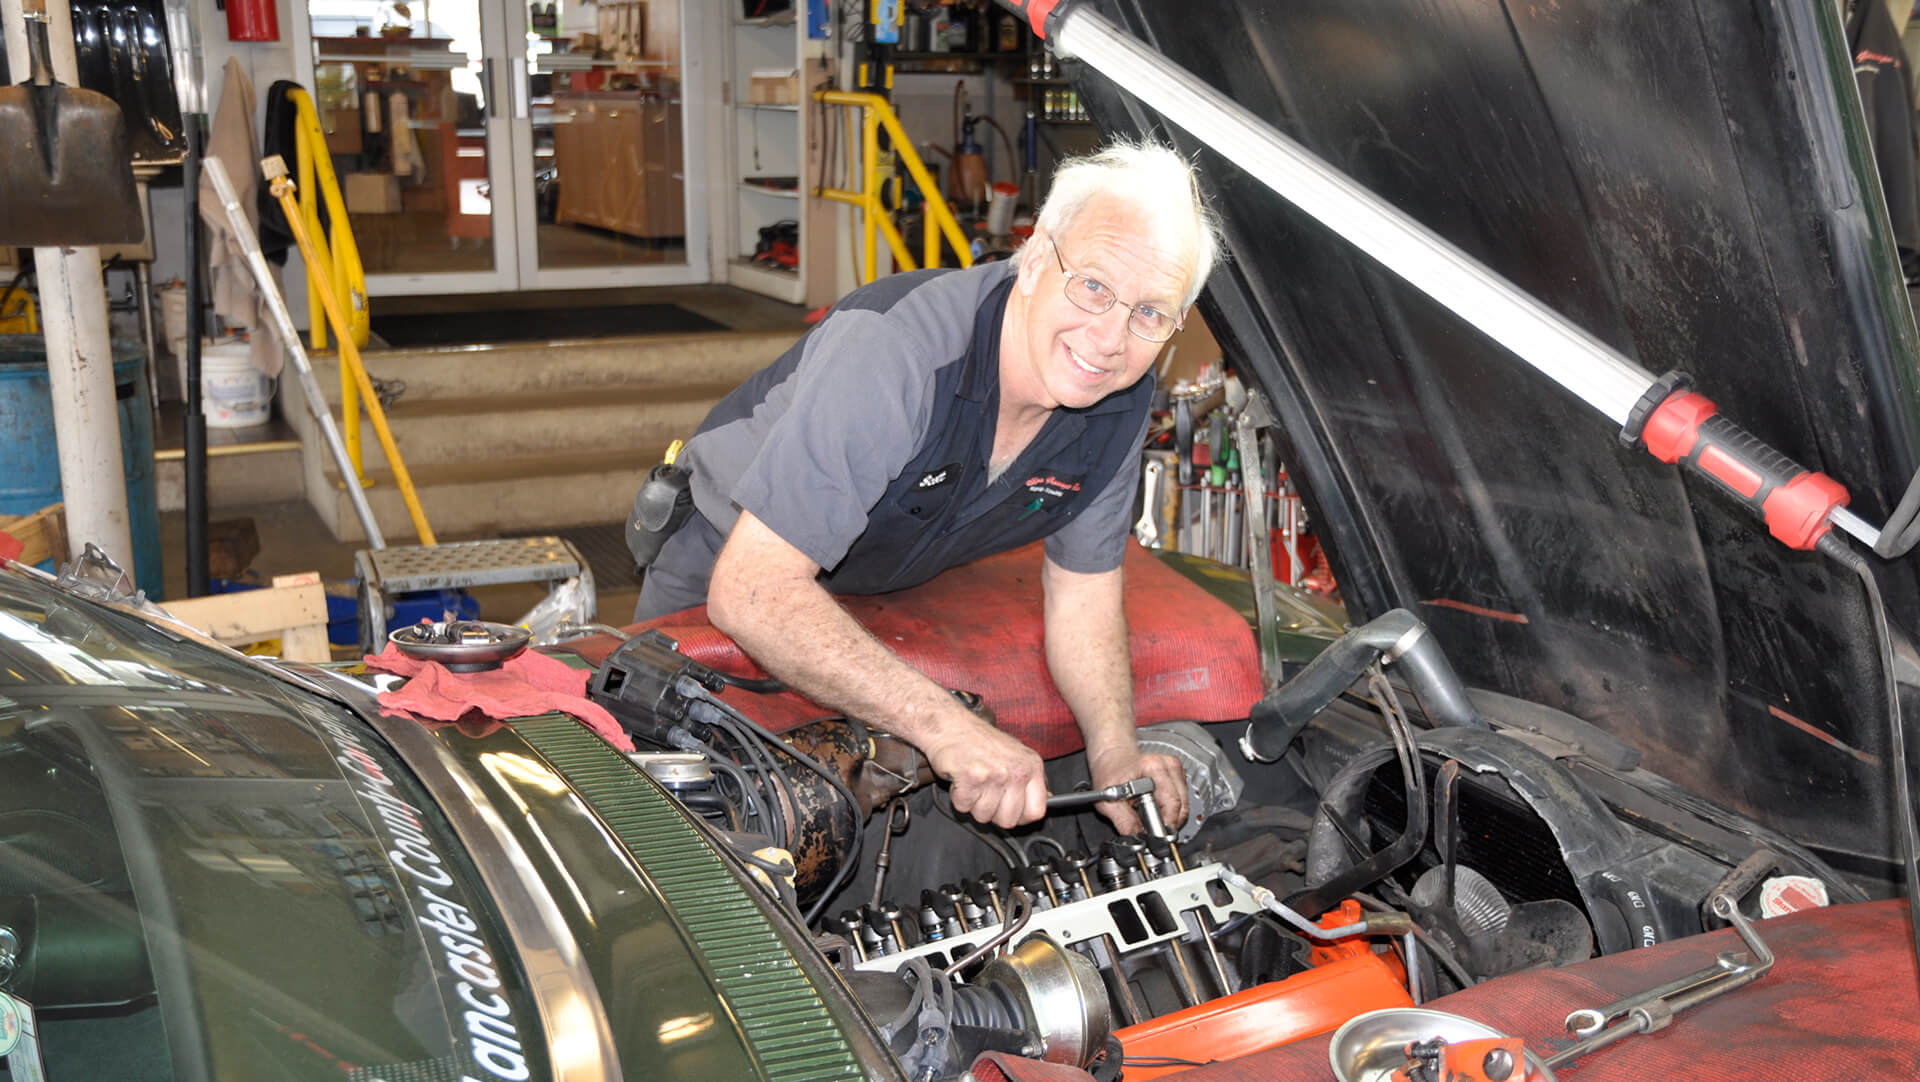 Quality Auto Repair & Inspection Services